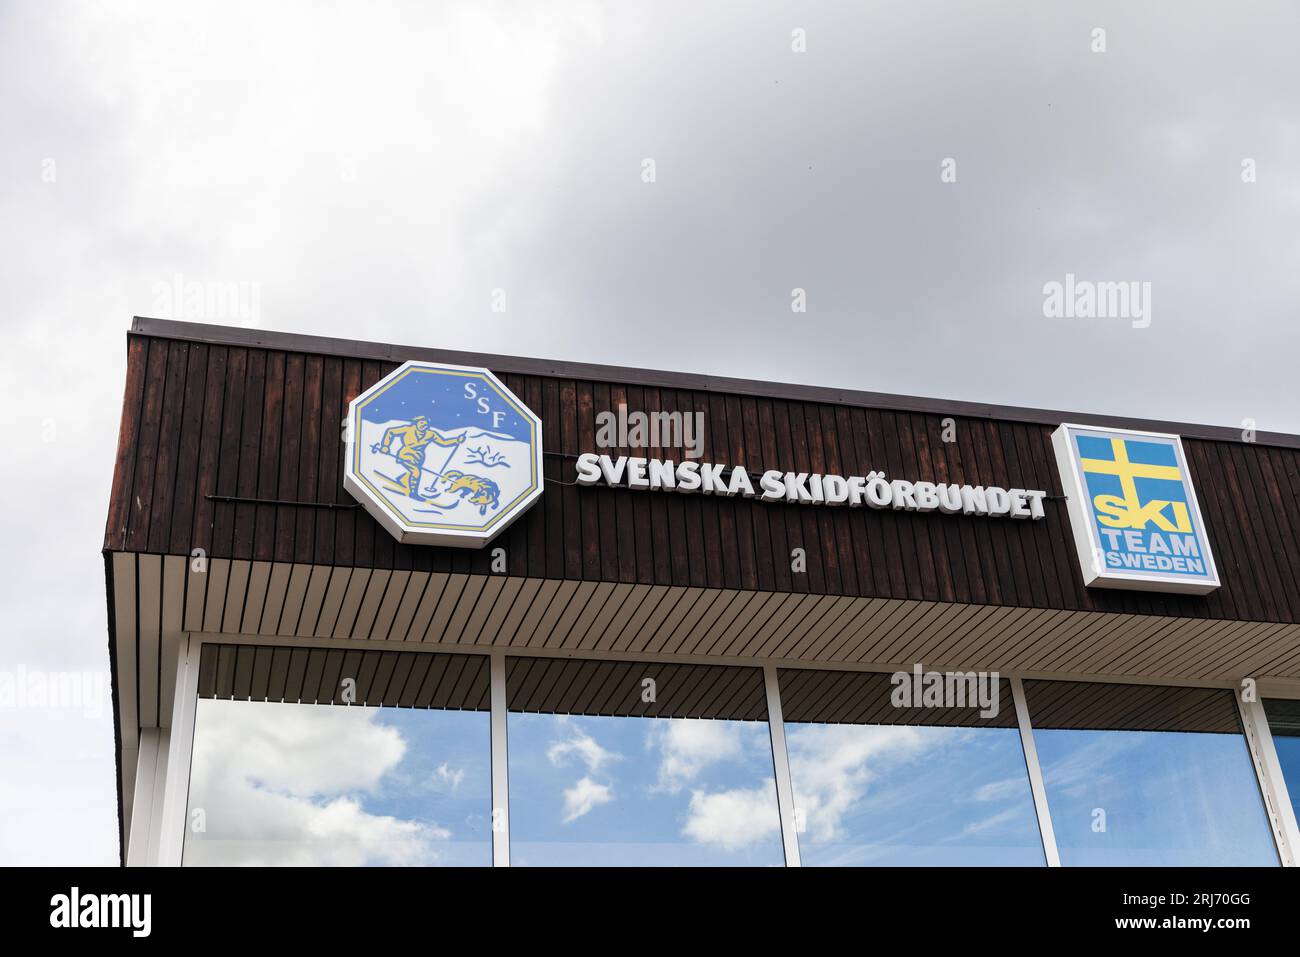 Signs and symbols, headquarters for The Swedish Ski Association (Swedish: Svenska Skidförbundet), which is a sports governing body for skiing in Sweden. Stock Photo